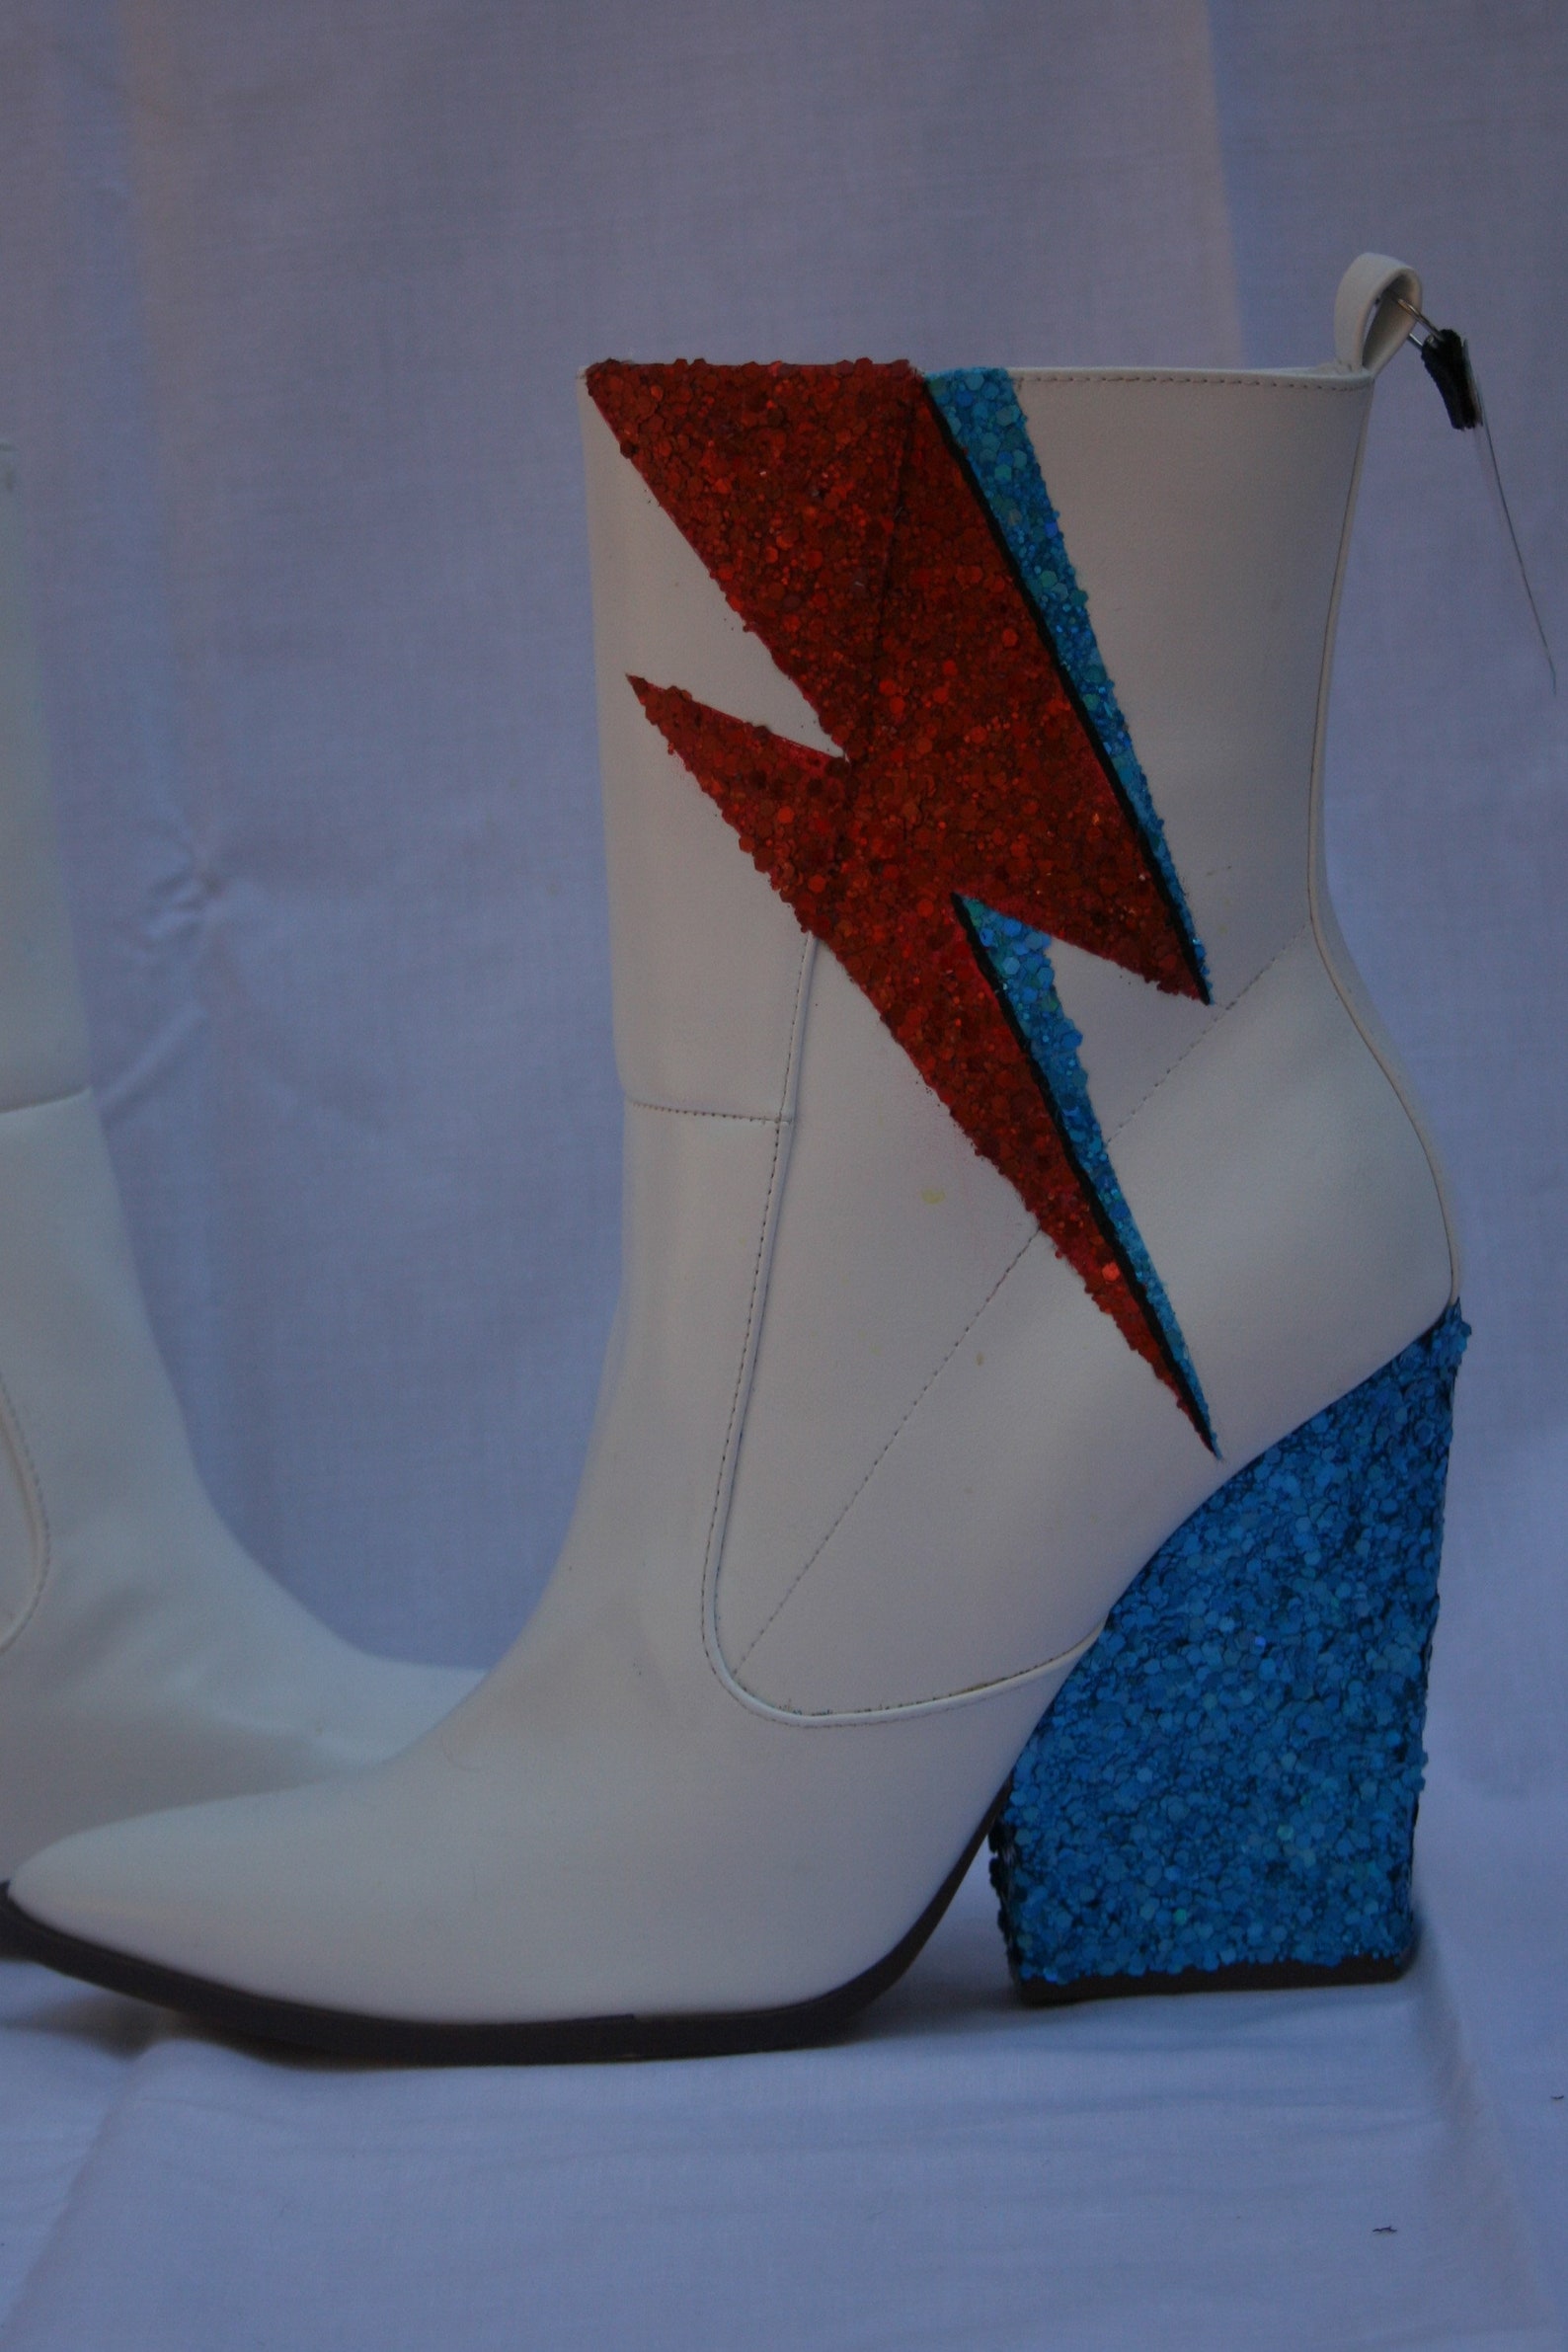 David Bowie Boots - Etsy